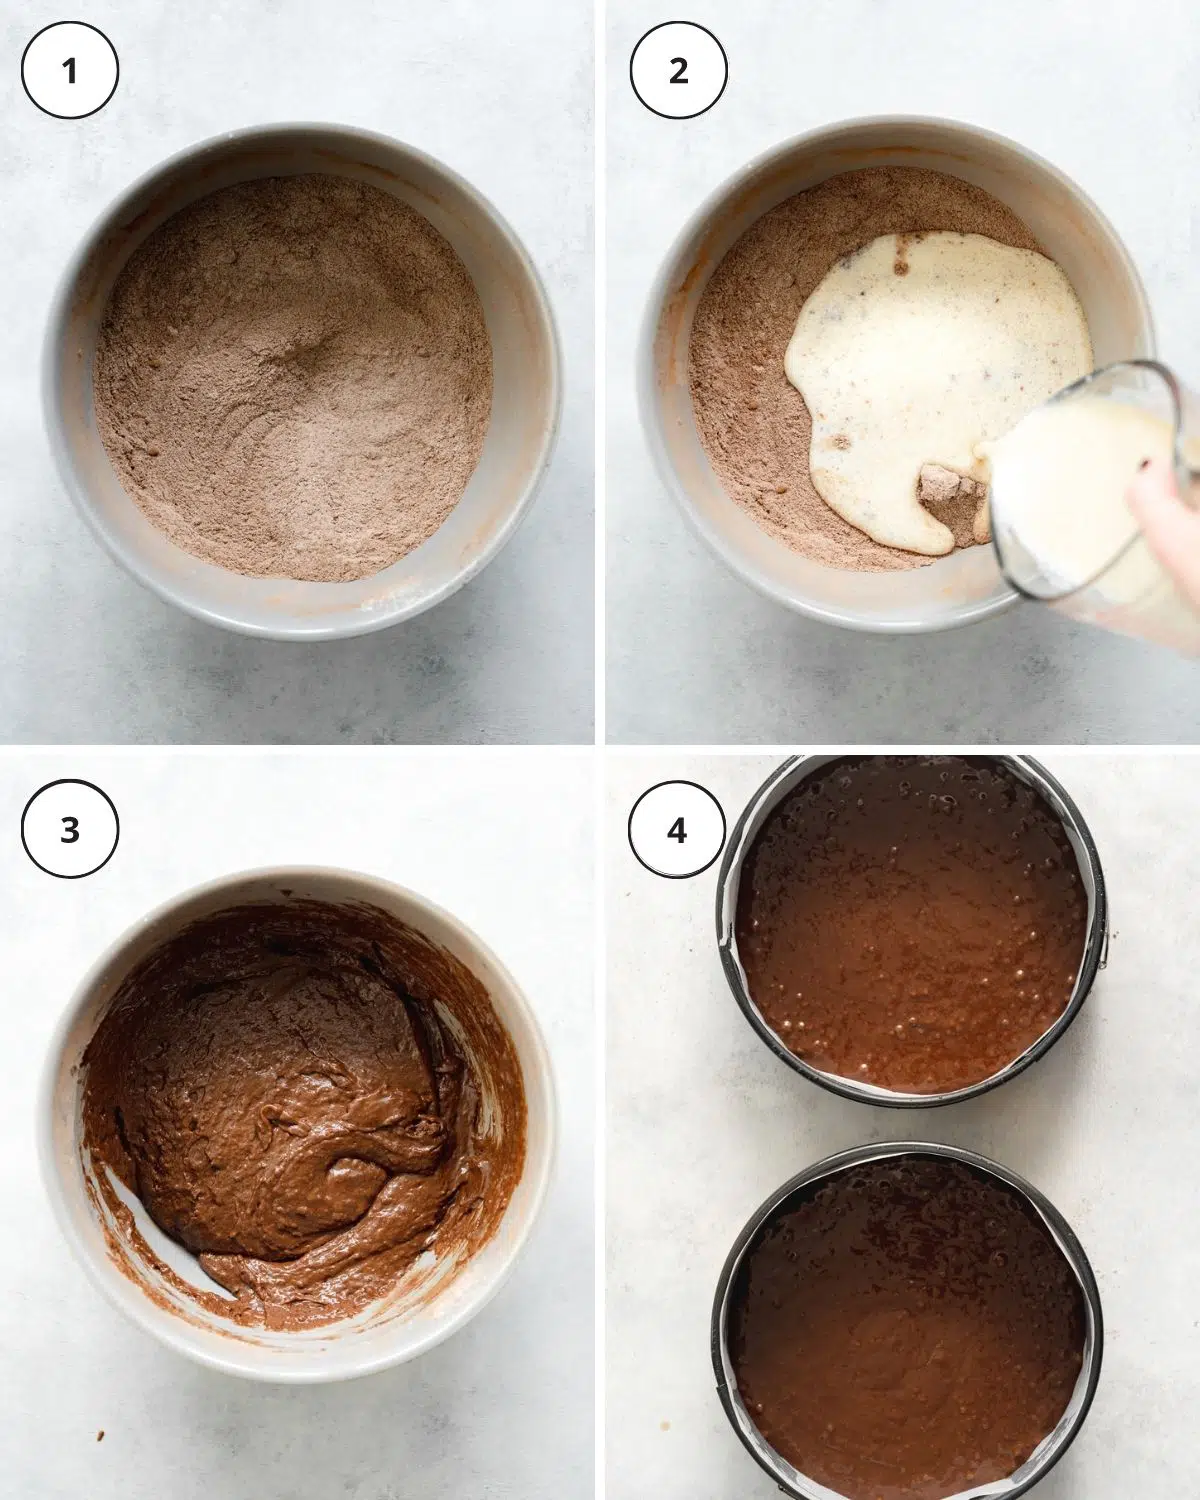 collage showing wet ingredients being mixed into a large bowl of dry ingredients to make chocolate cake.